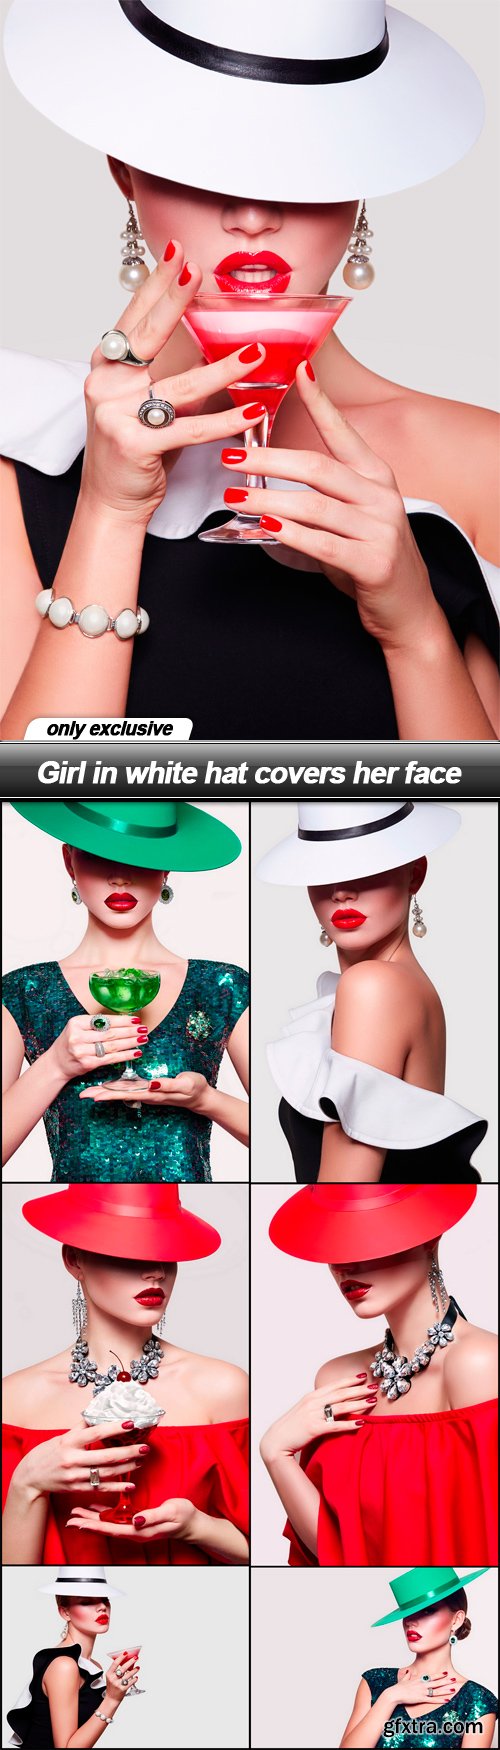 Girl in white hat covers her face - 7 UHQ JPEG